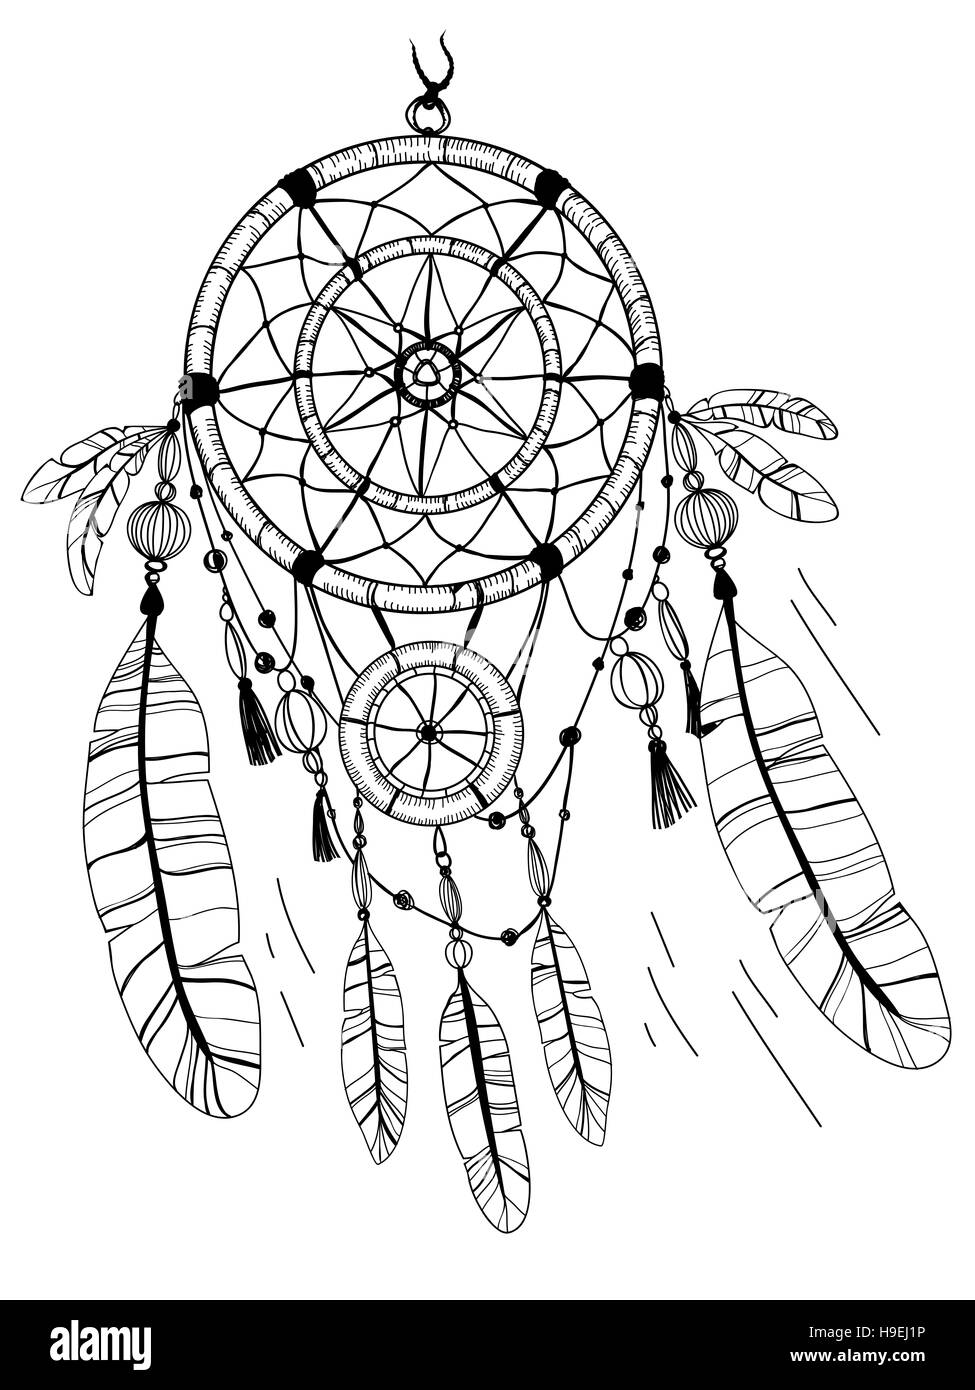 Dreamcatcher, feathers and beads. Native american indian dream catcher, traditional symbol Stock Photo